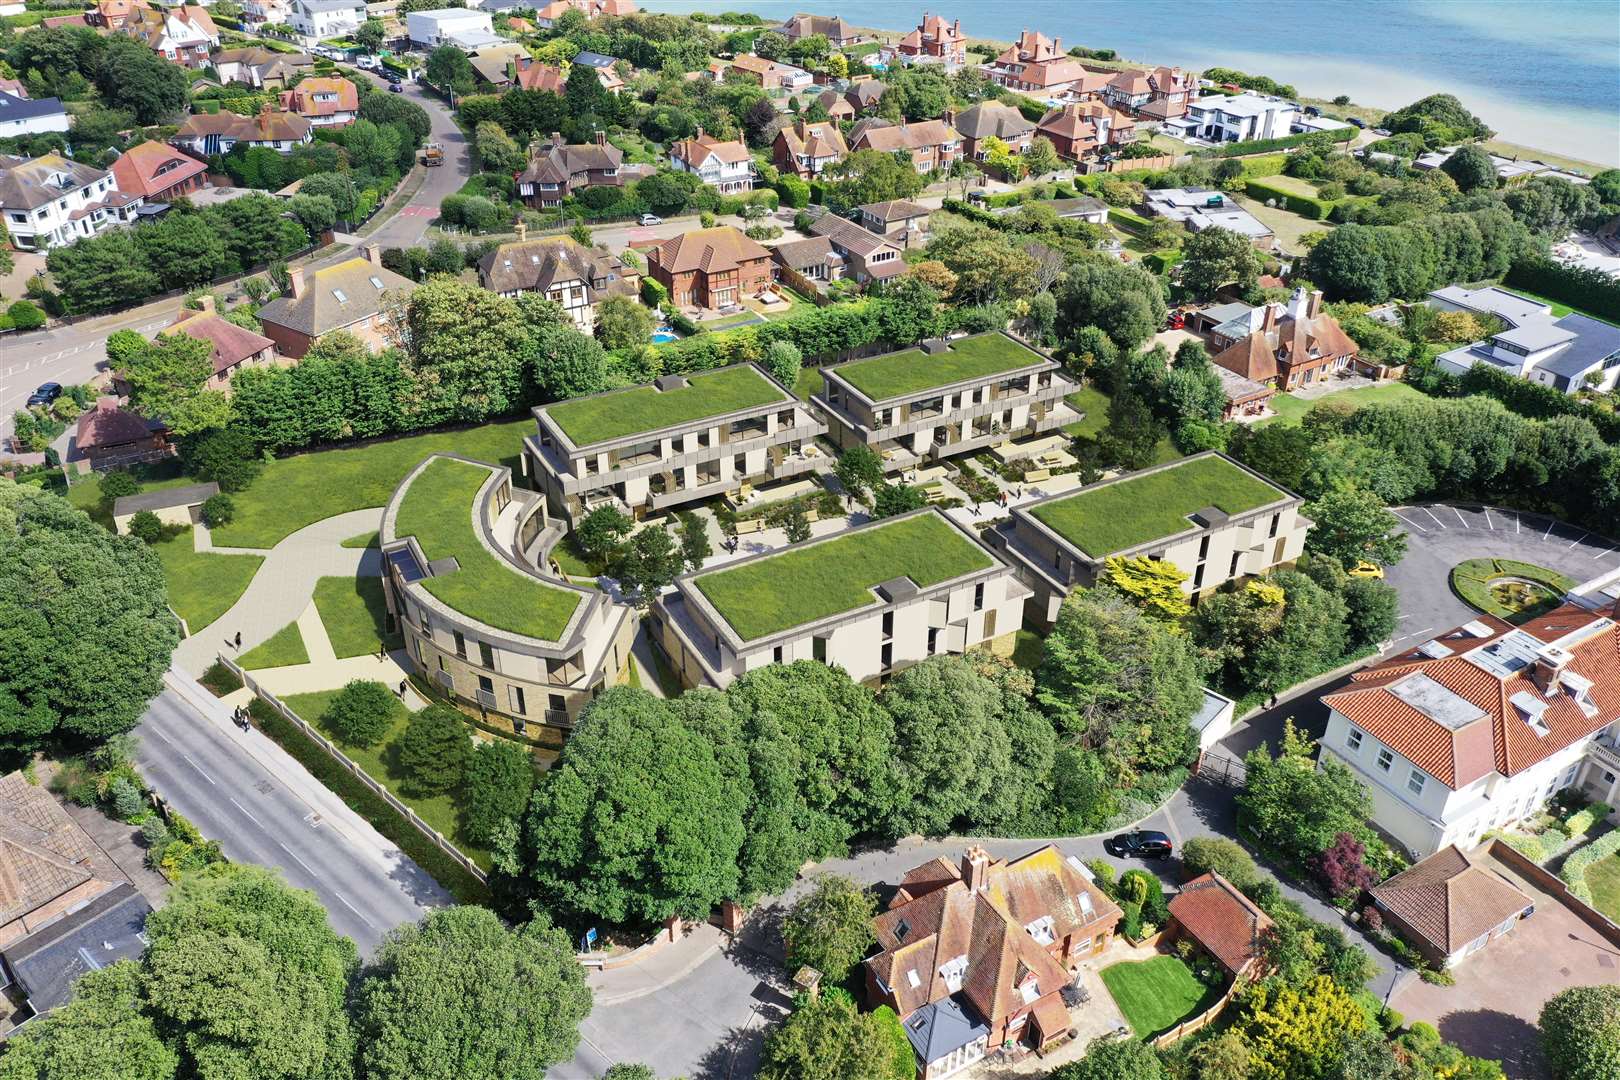 The development will include five buildings on the clifftop plot in North Foreland Road in Broadstairs. Picture: Sunningdale/Hume